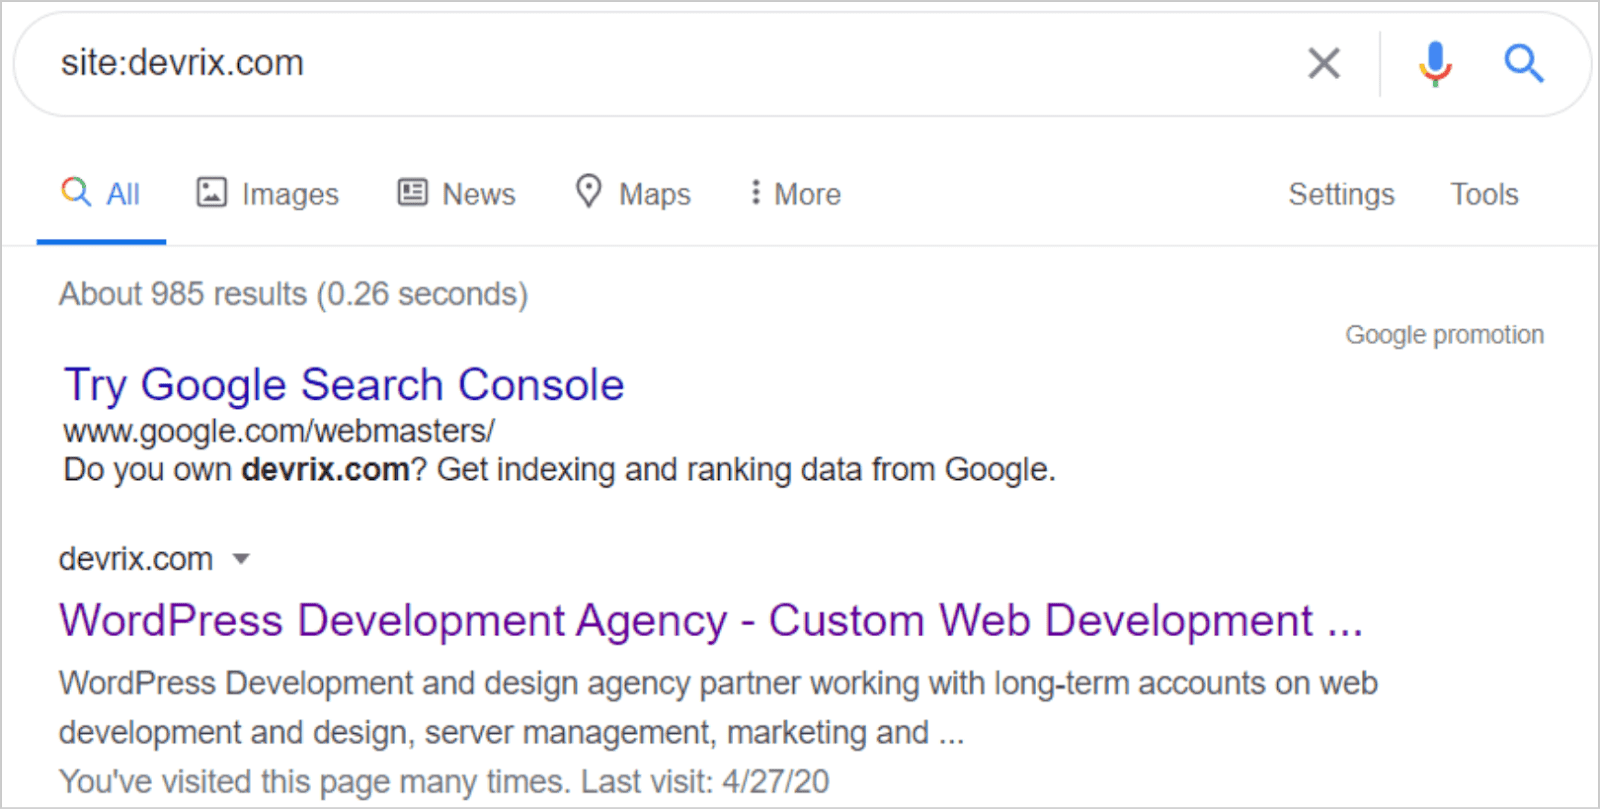 Site not indexed by Google